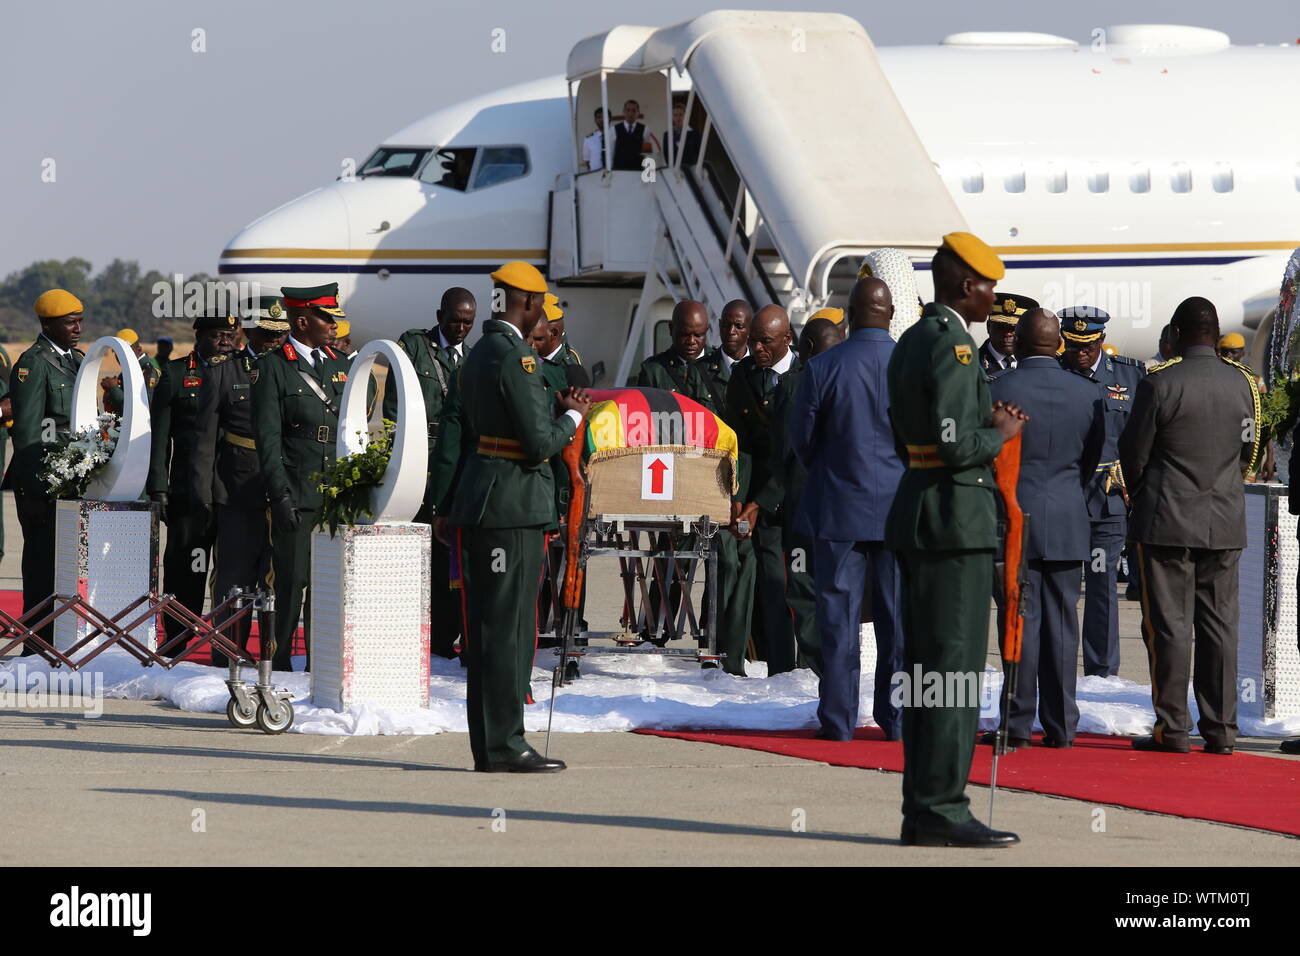 Harare, Zimbabwe. 11th Sep, 2019. The body of the late former Zimbabwean President Robert Mugabe arrives at the Robert Gabriel Mugabe International Airport in Harare, Zimbabwe, on Sept. 11, 2019. The body of the late former Zimbabwean President Robert Mugabe, who died in Singapore last Friday aged 95, arrived in the country on Wednesday afternoon ahead of his burial planned for Sunday. Credit: Chen Yaqin/Xinhua/Alamy Live News Stock Photo